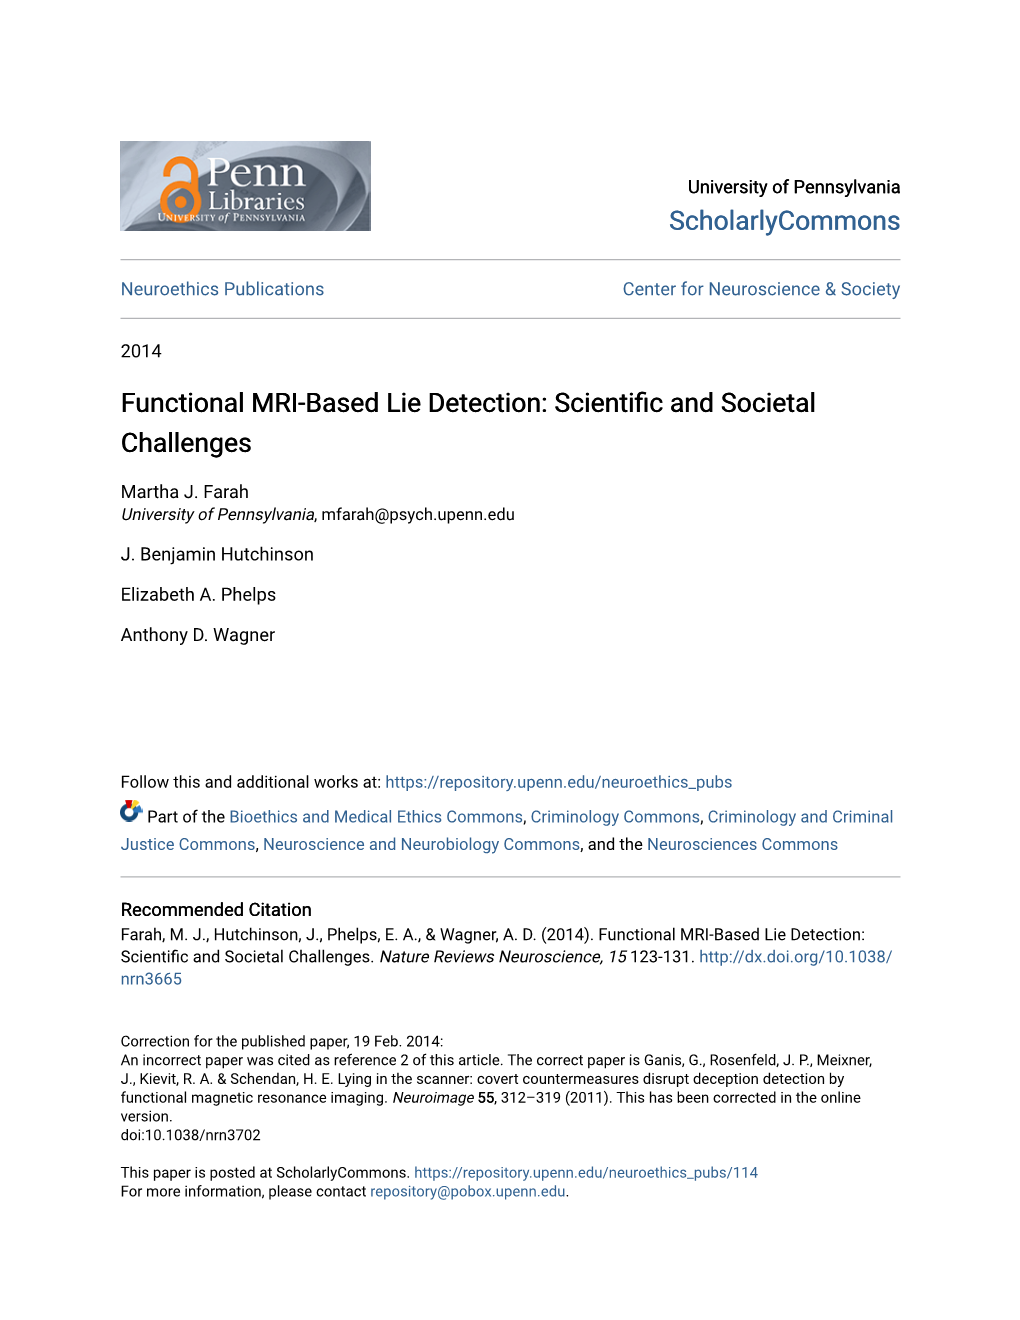 Functional MRI-Based Lie Detection: Scientific and Societal Challenges